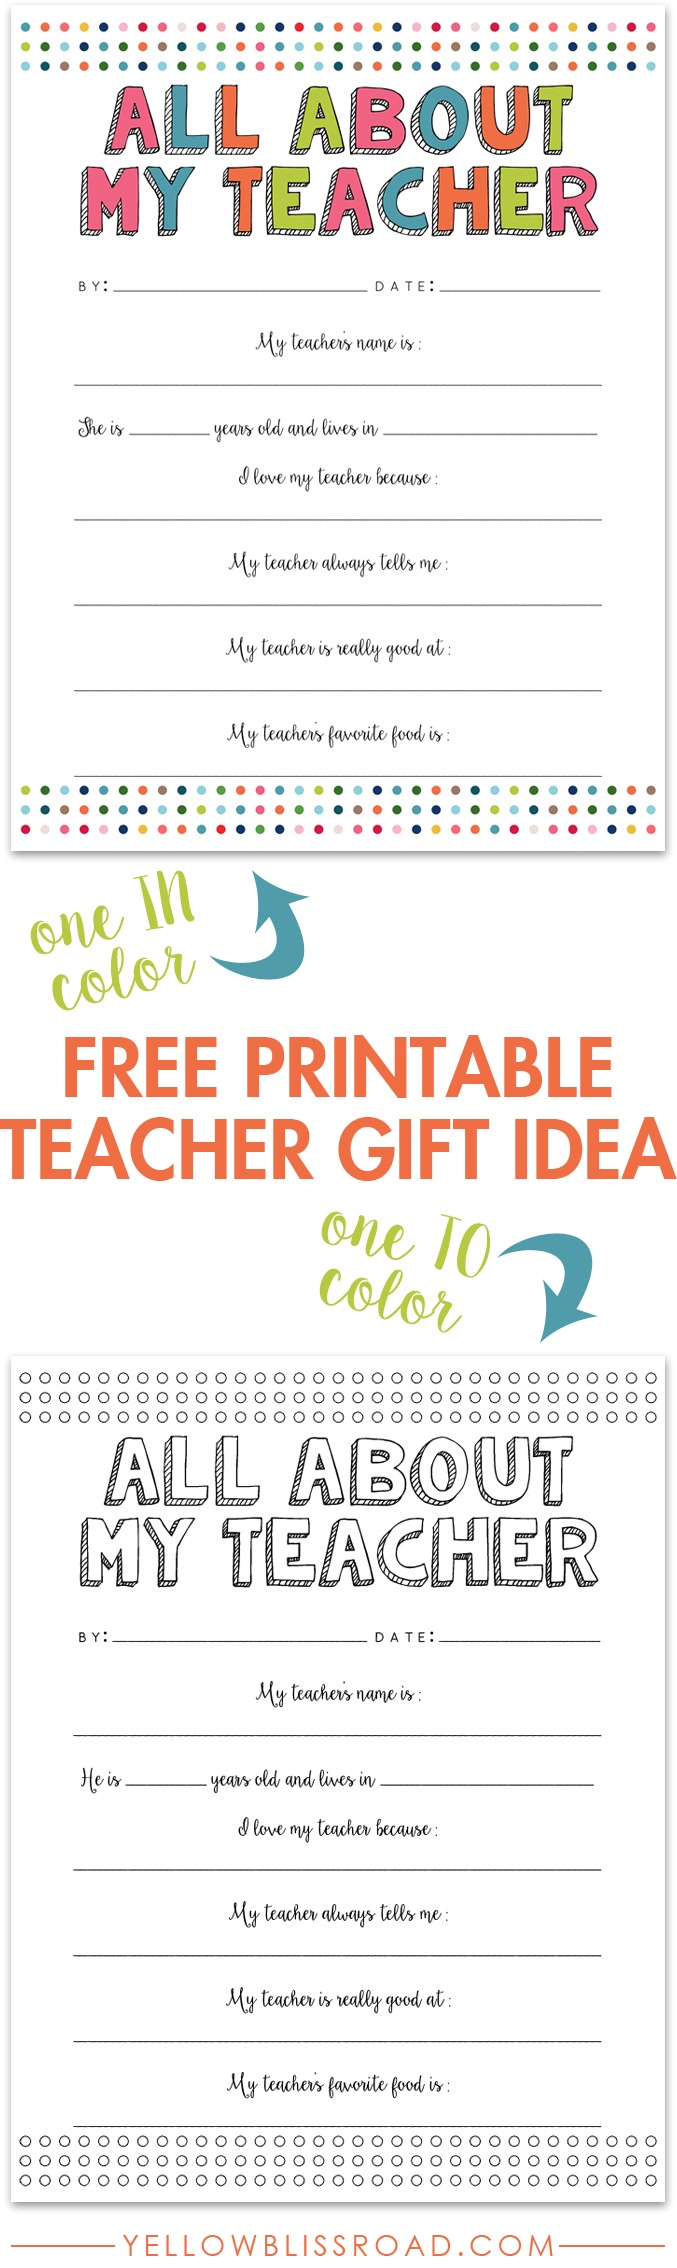 All About My Teacher Free Printable - Yellow Bliss Road - All About My Teacher Free Printable